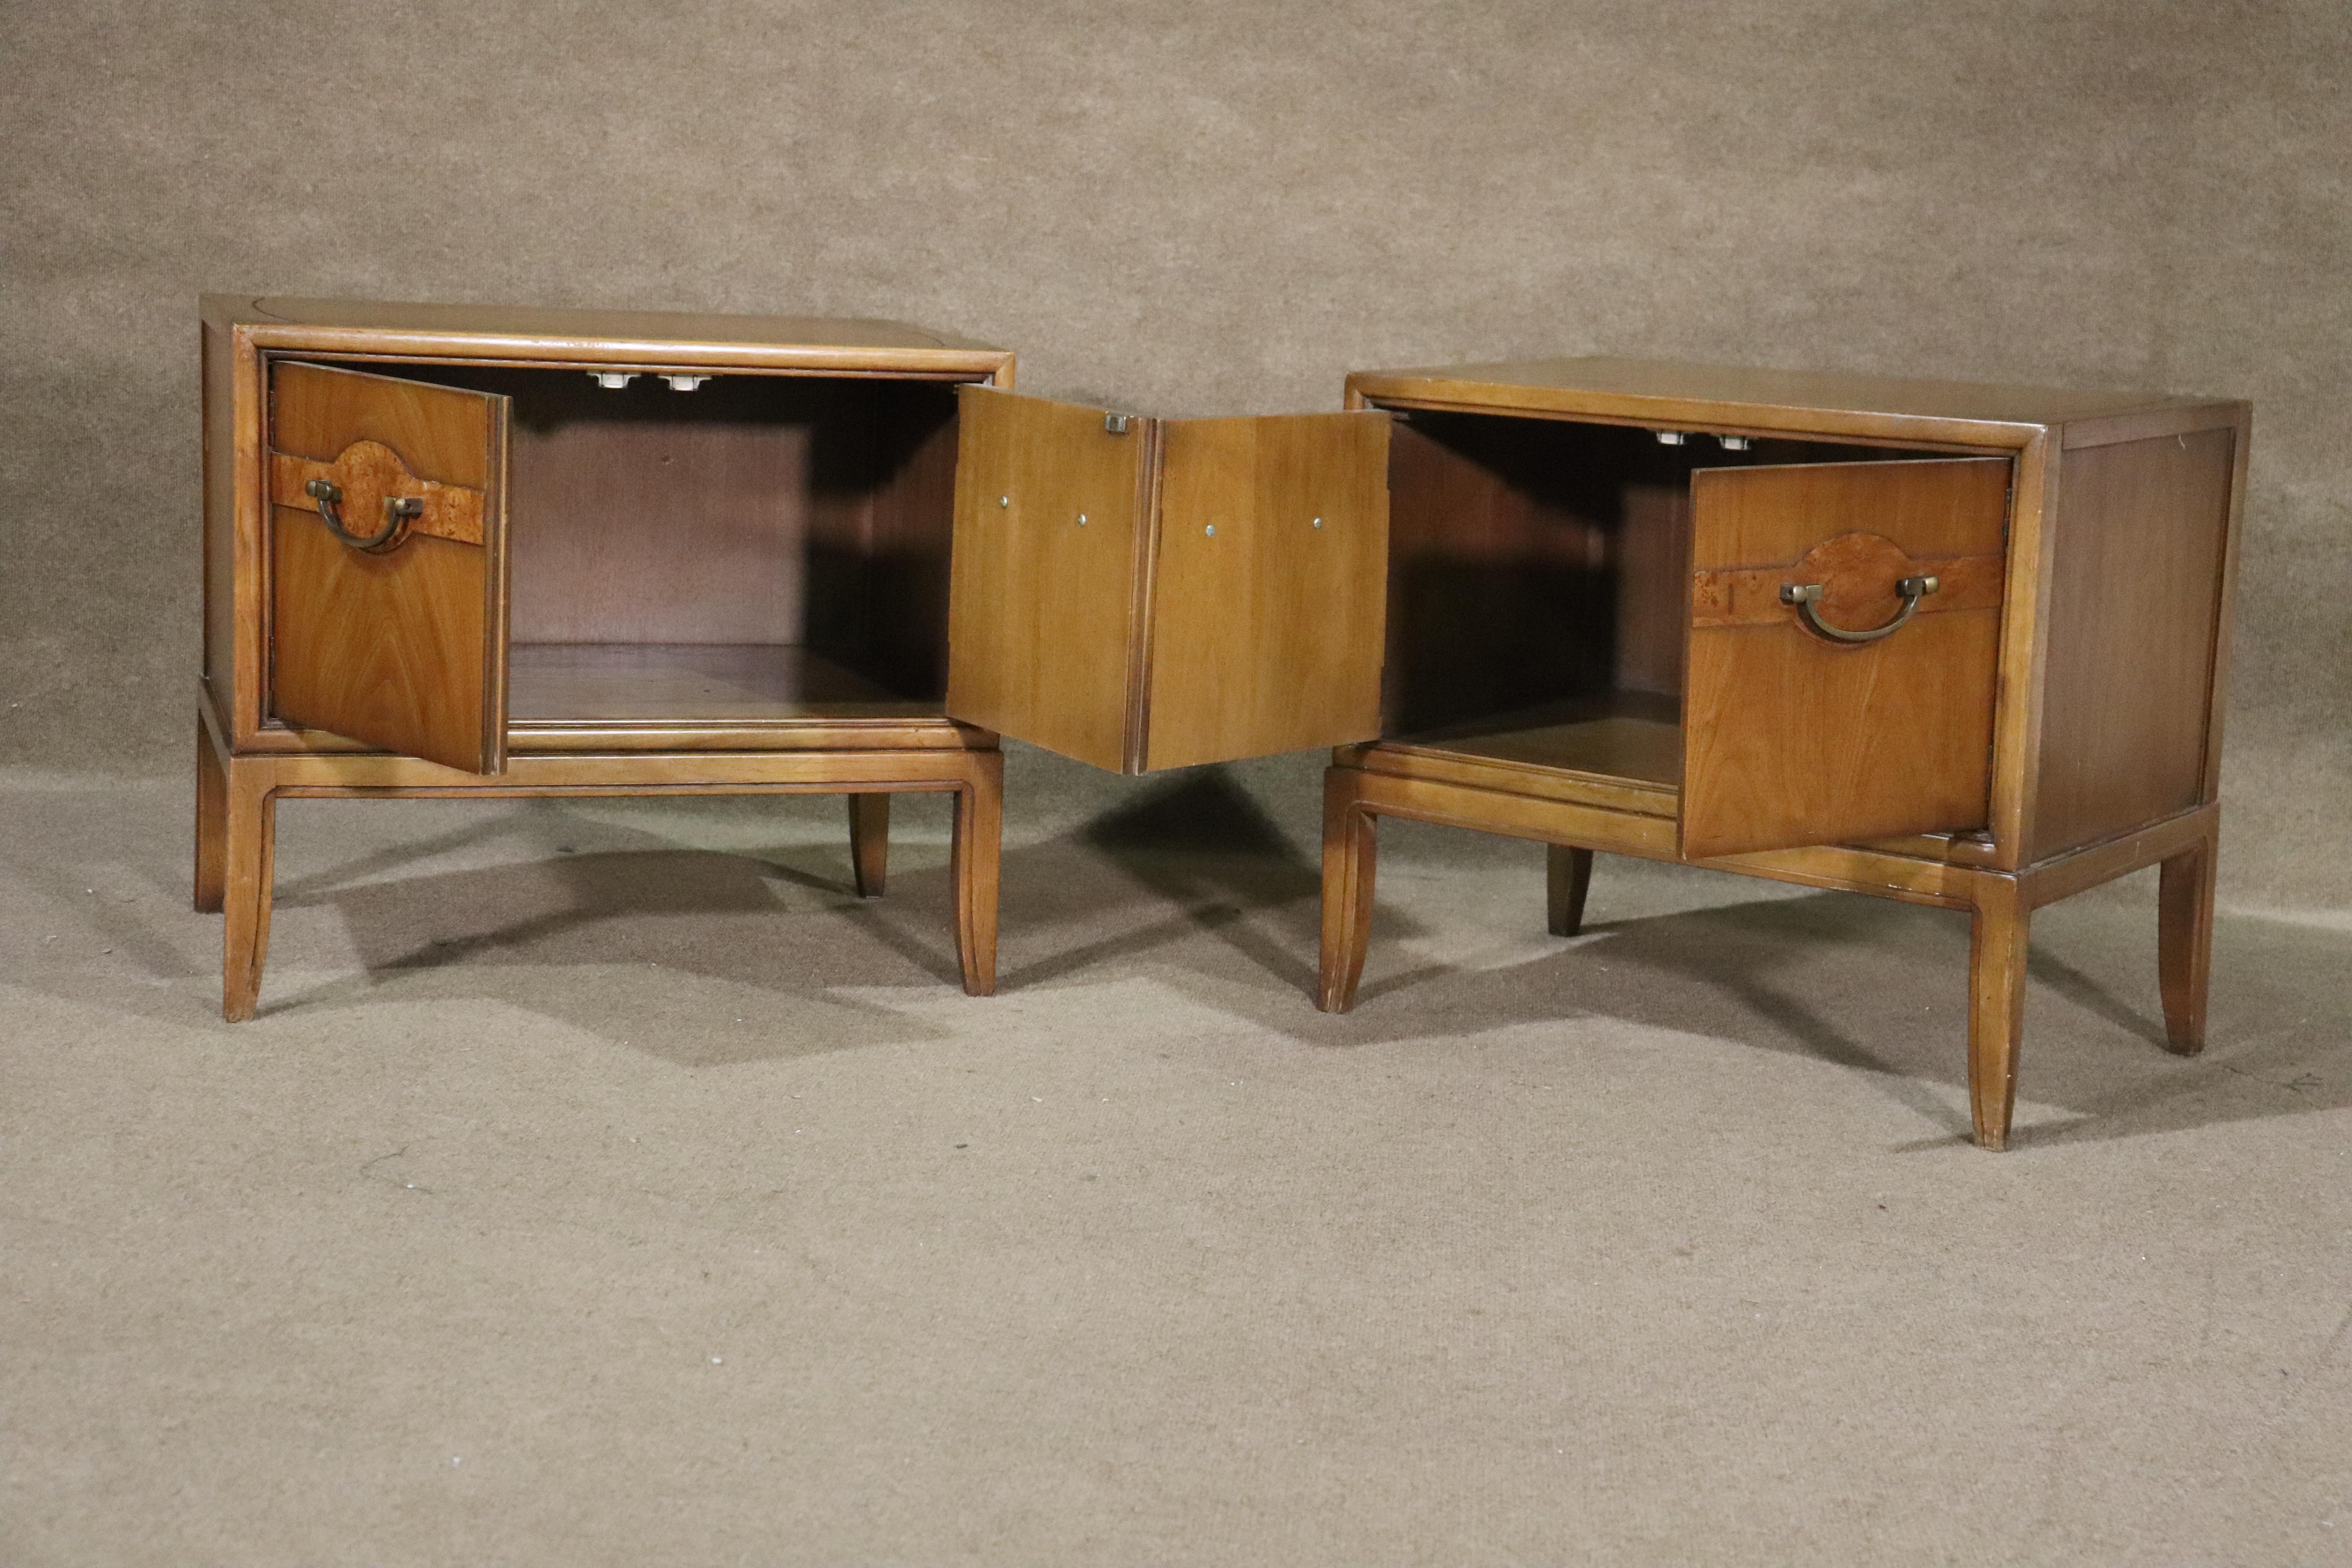 Pair of vintage modern end tables with two door cabinet storage. Warm walnut grain and brass hardware.
Please confirm location NY or NJ